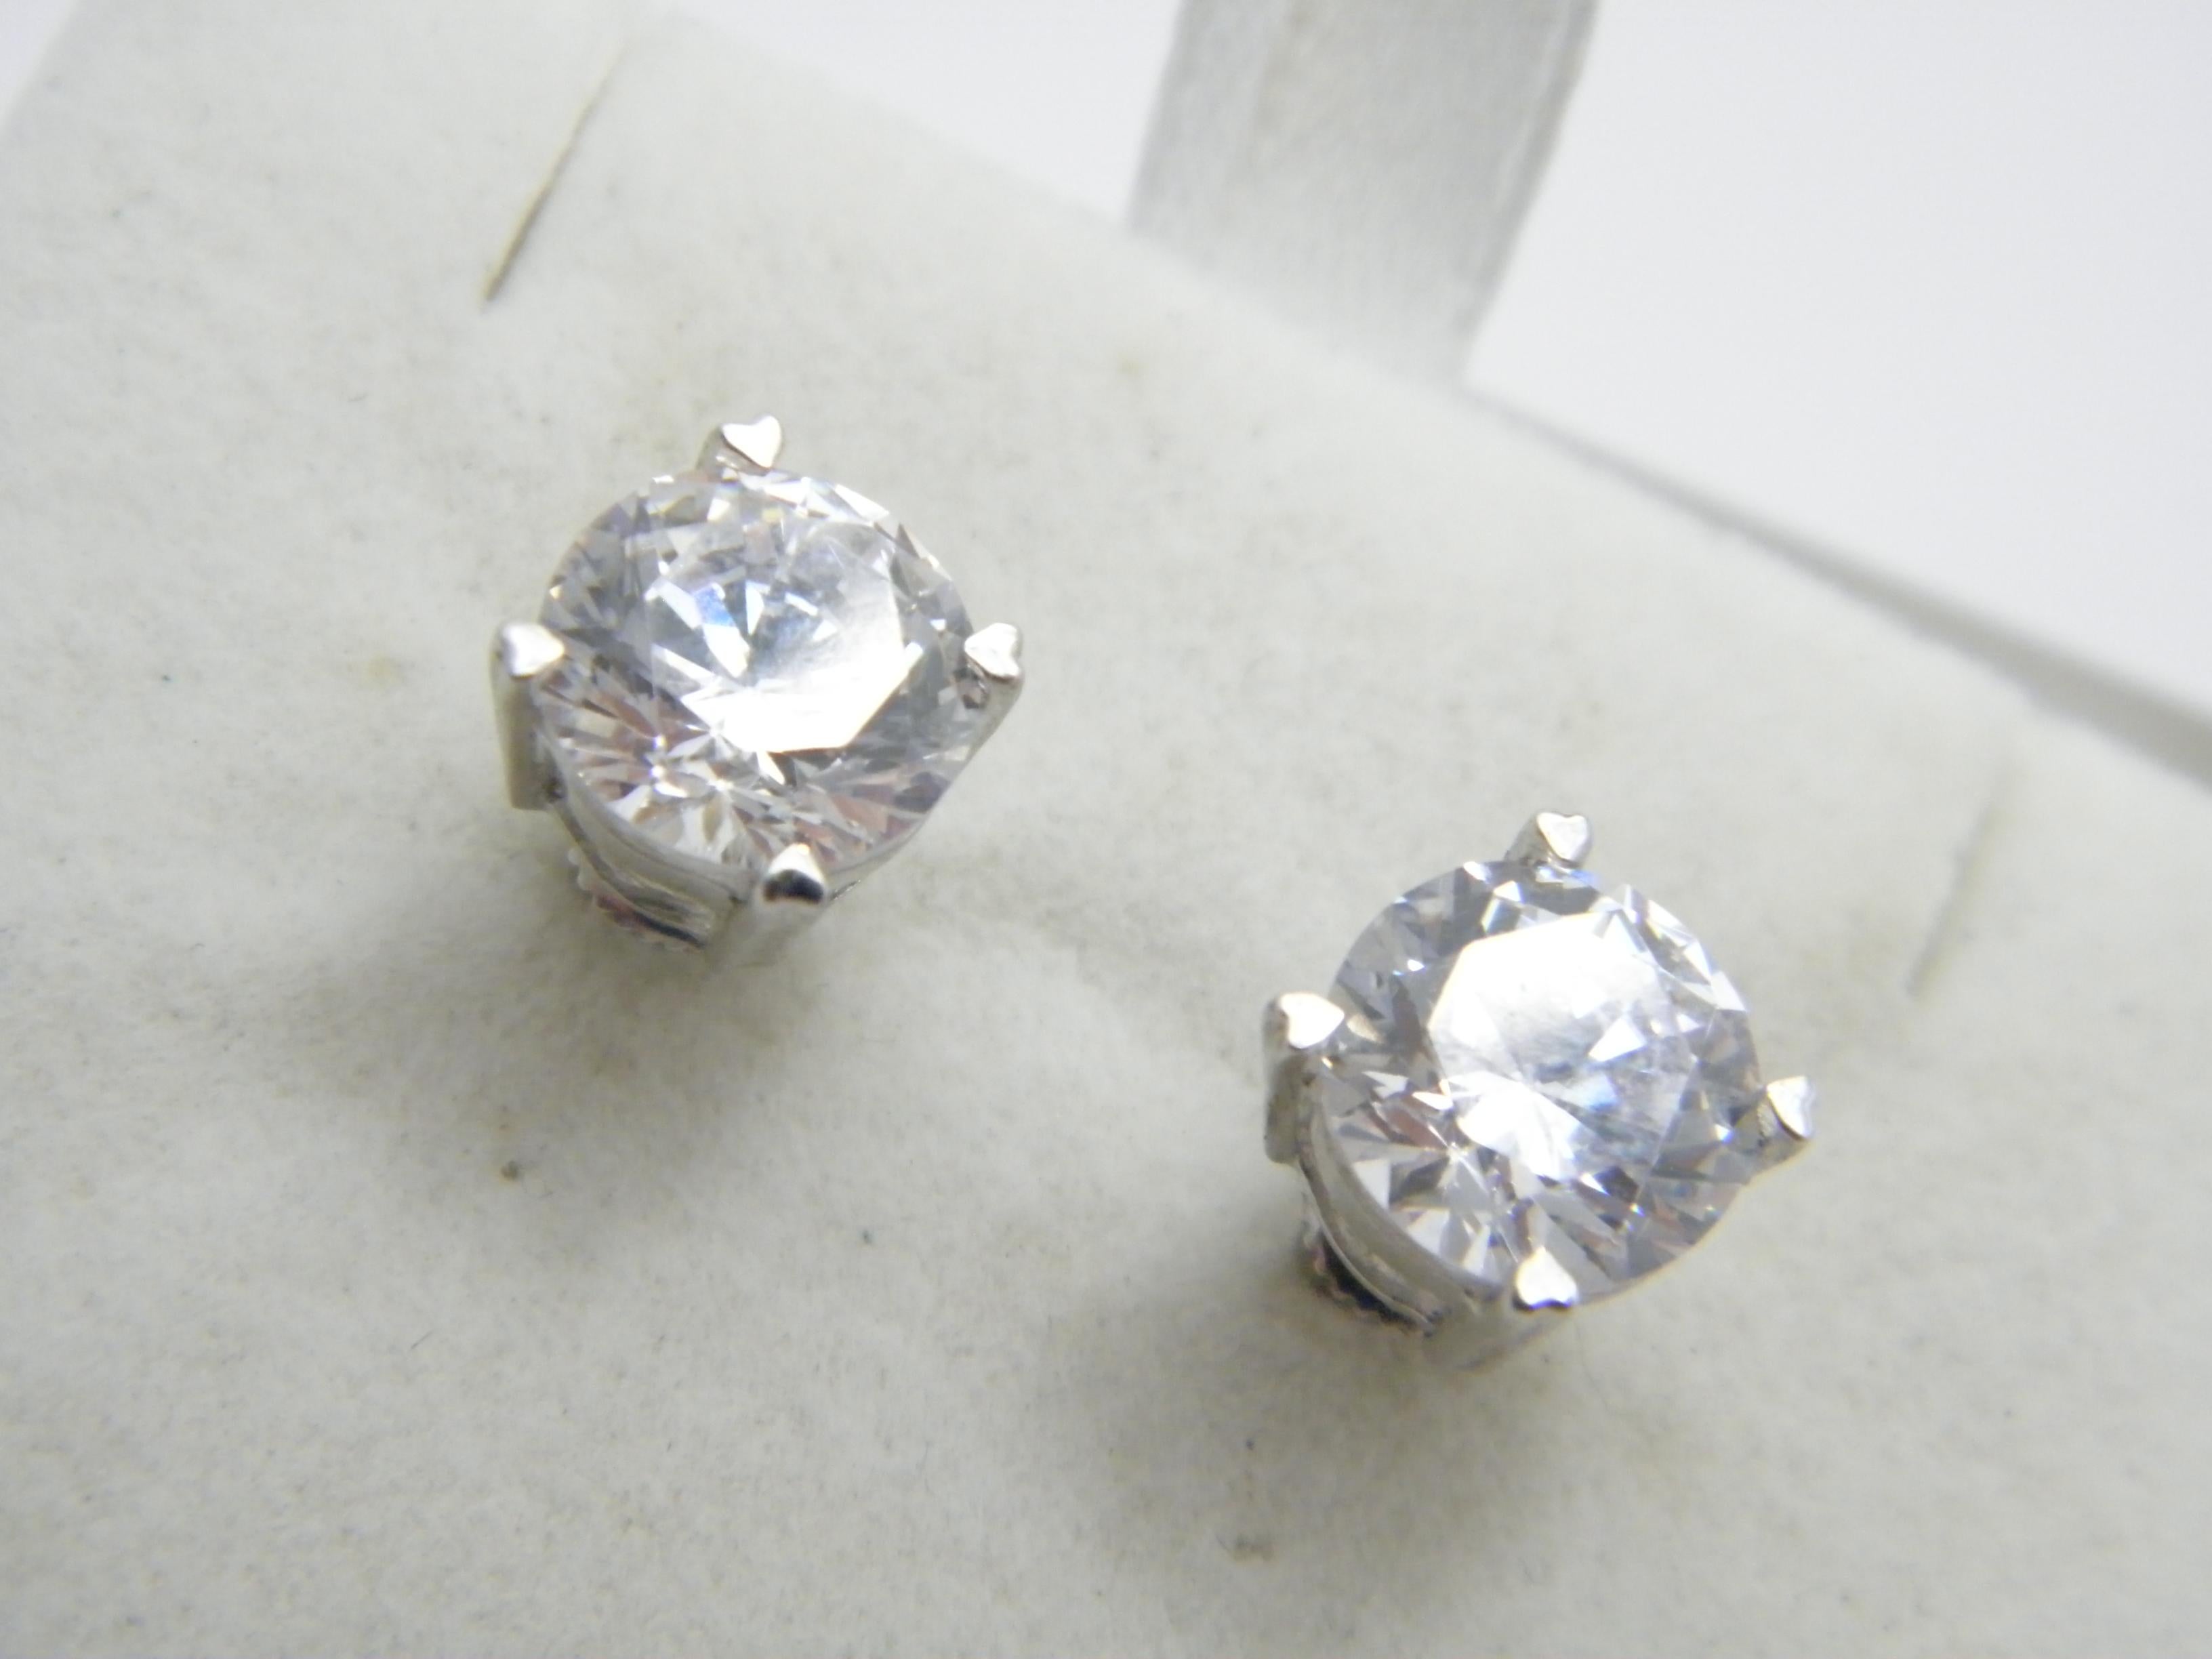 A very special item for you to consider:

STERLING SILVER HUGE 3.50 CARAT DIAMOND PASTE STUD EARRINGS

DETAILS
Material: 925/000 Sterling silver, heavy gauge
Style: Classic Sparkling gem set stud earrings with secure screw backs
Gemstones: round